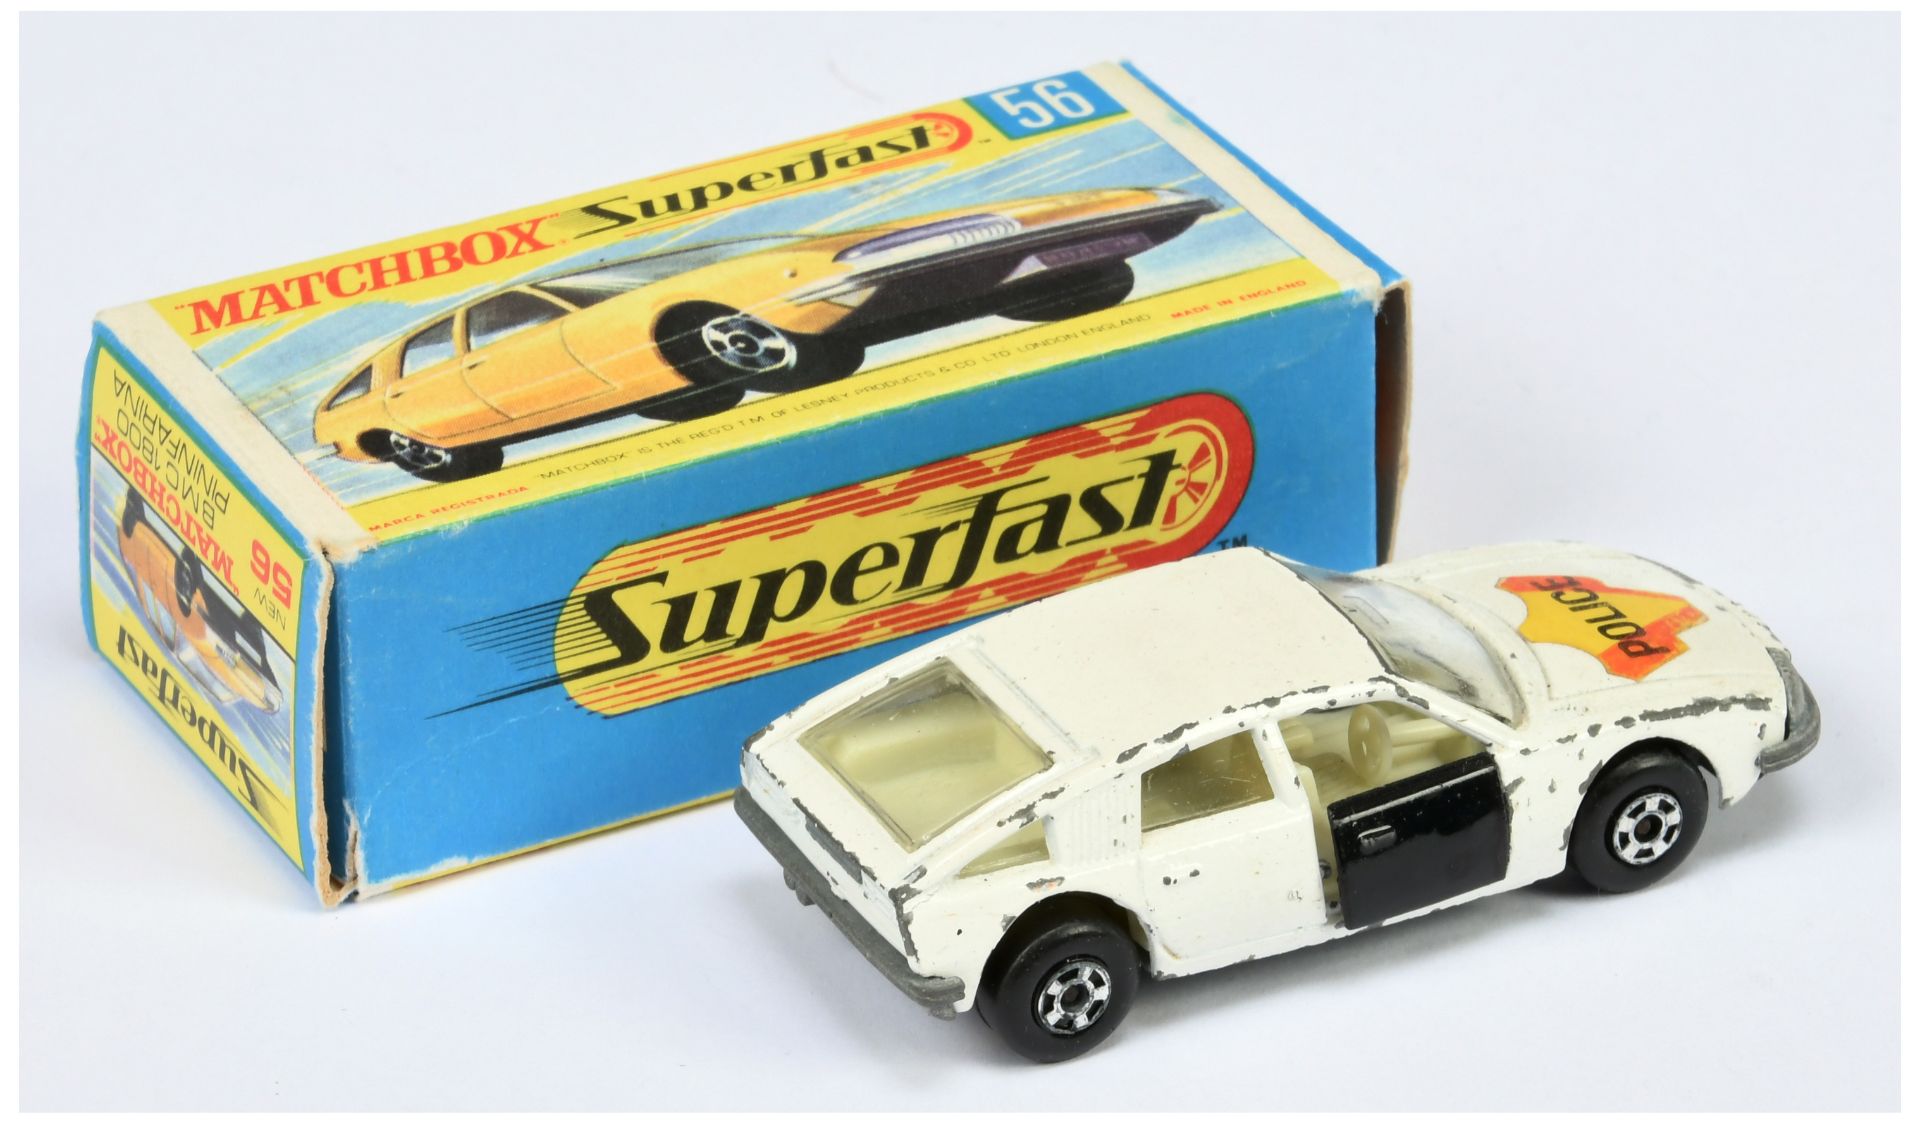 Matchbox Superfast 56a BMC Pininfarina MADE IN BRAZIL ISSUE - Image 2 of 3